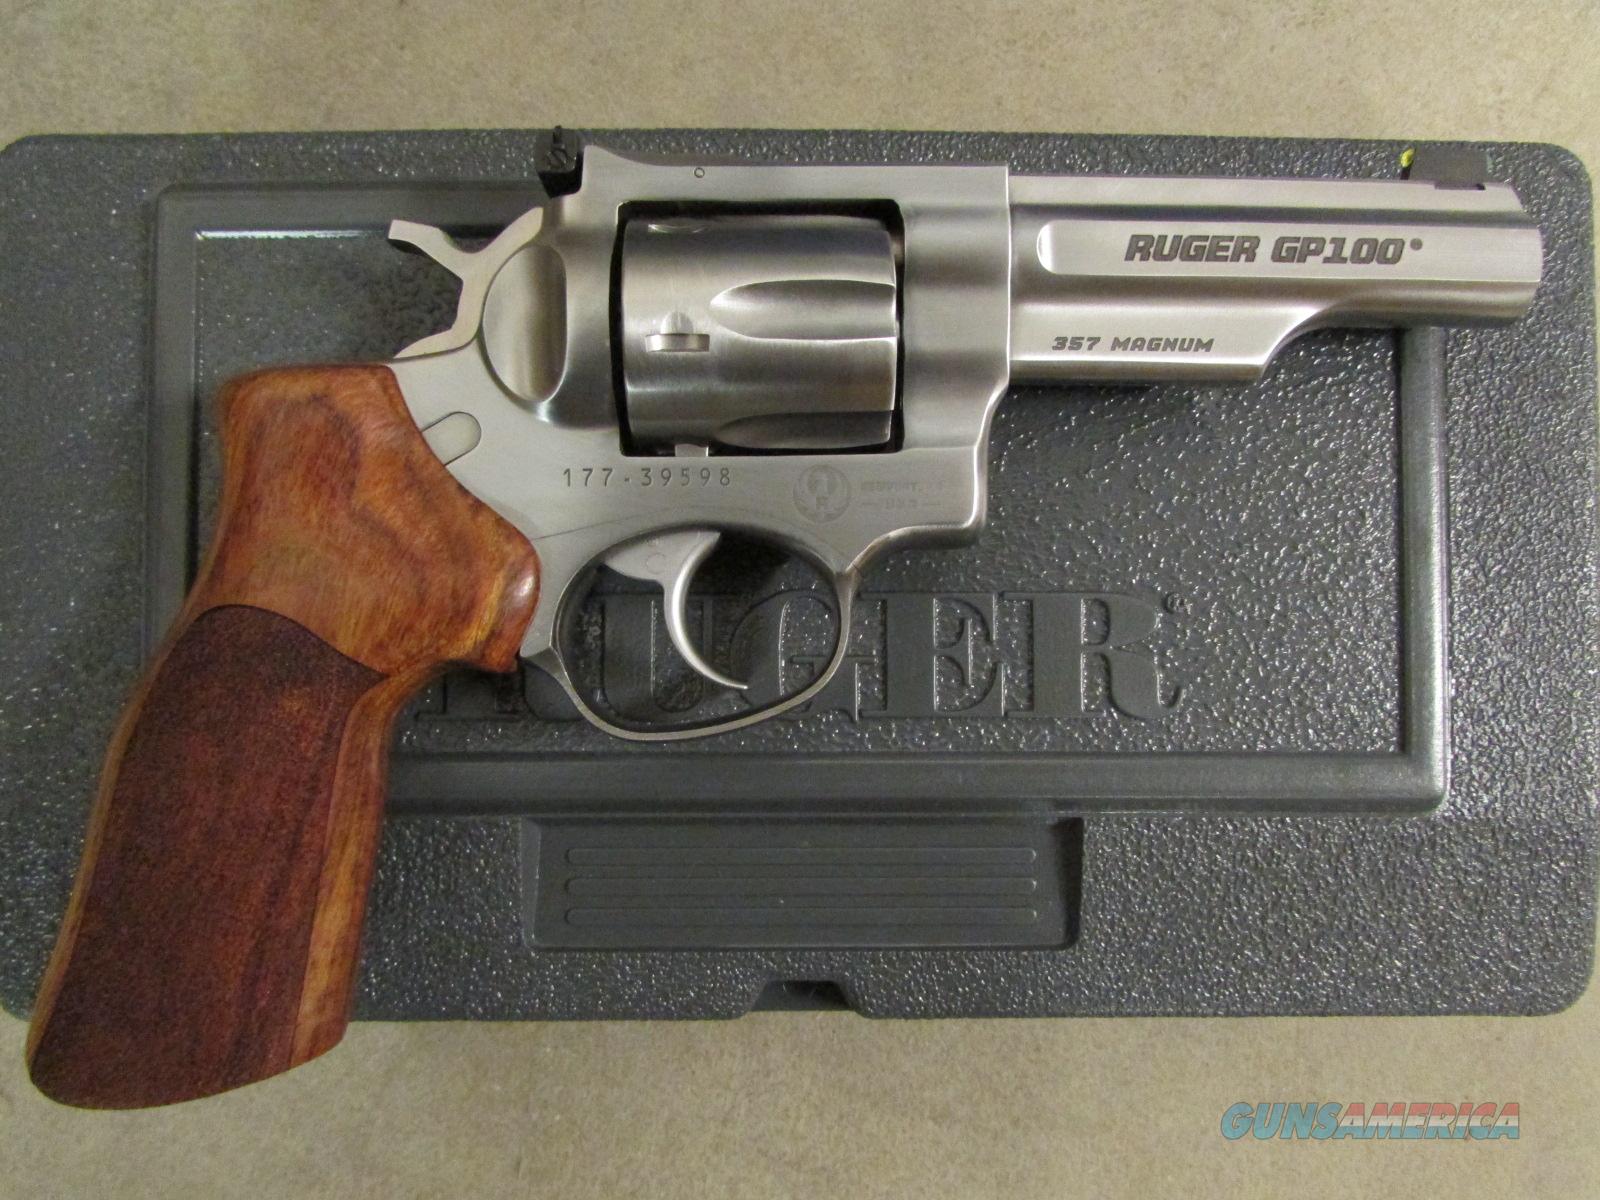 Ruger Gp100 Match Champion Double A For Sale At 968041939 8267